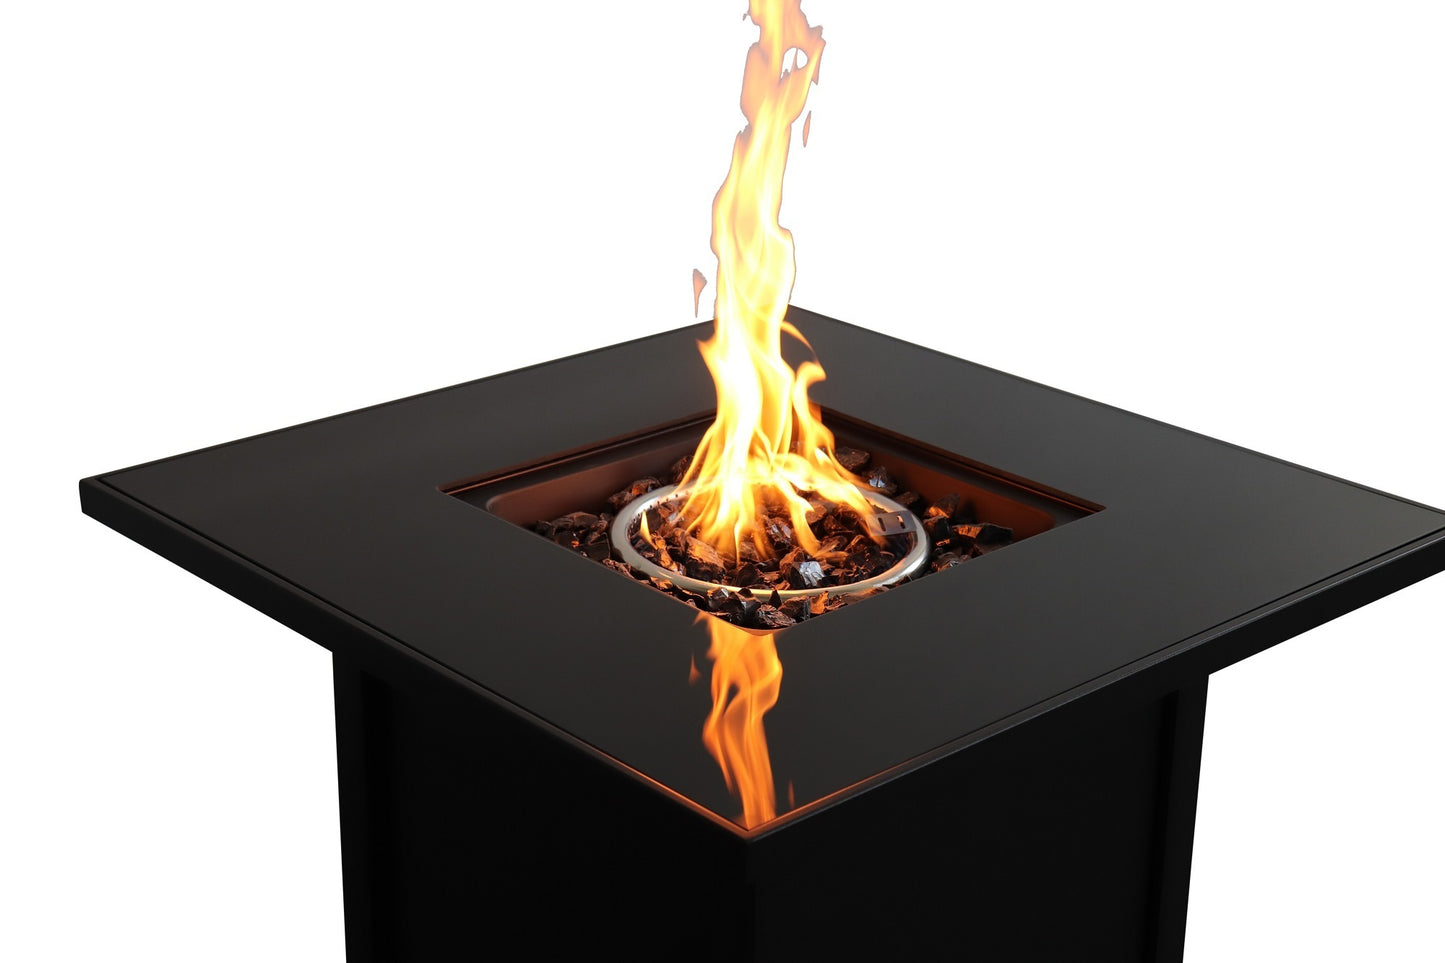 Contempo Propane Fire Pit Table for Outdoor Living Space (30 Inch, Steel Black)